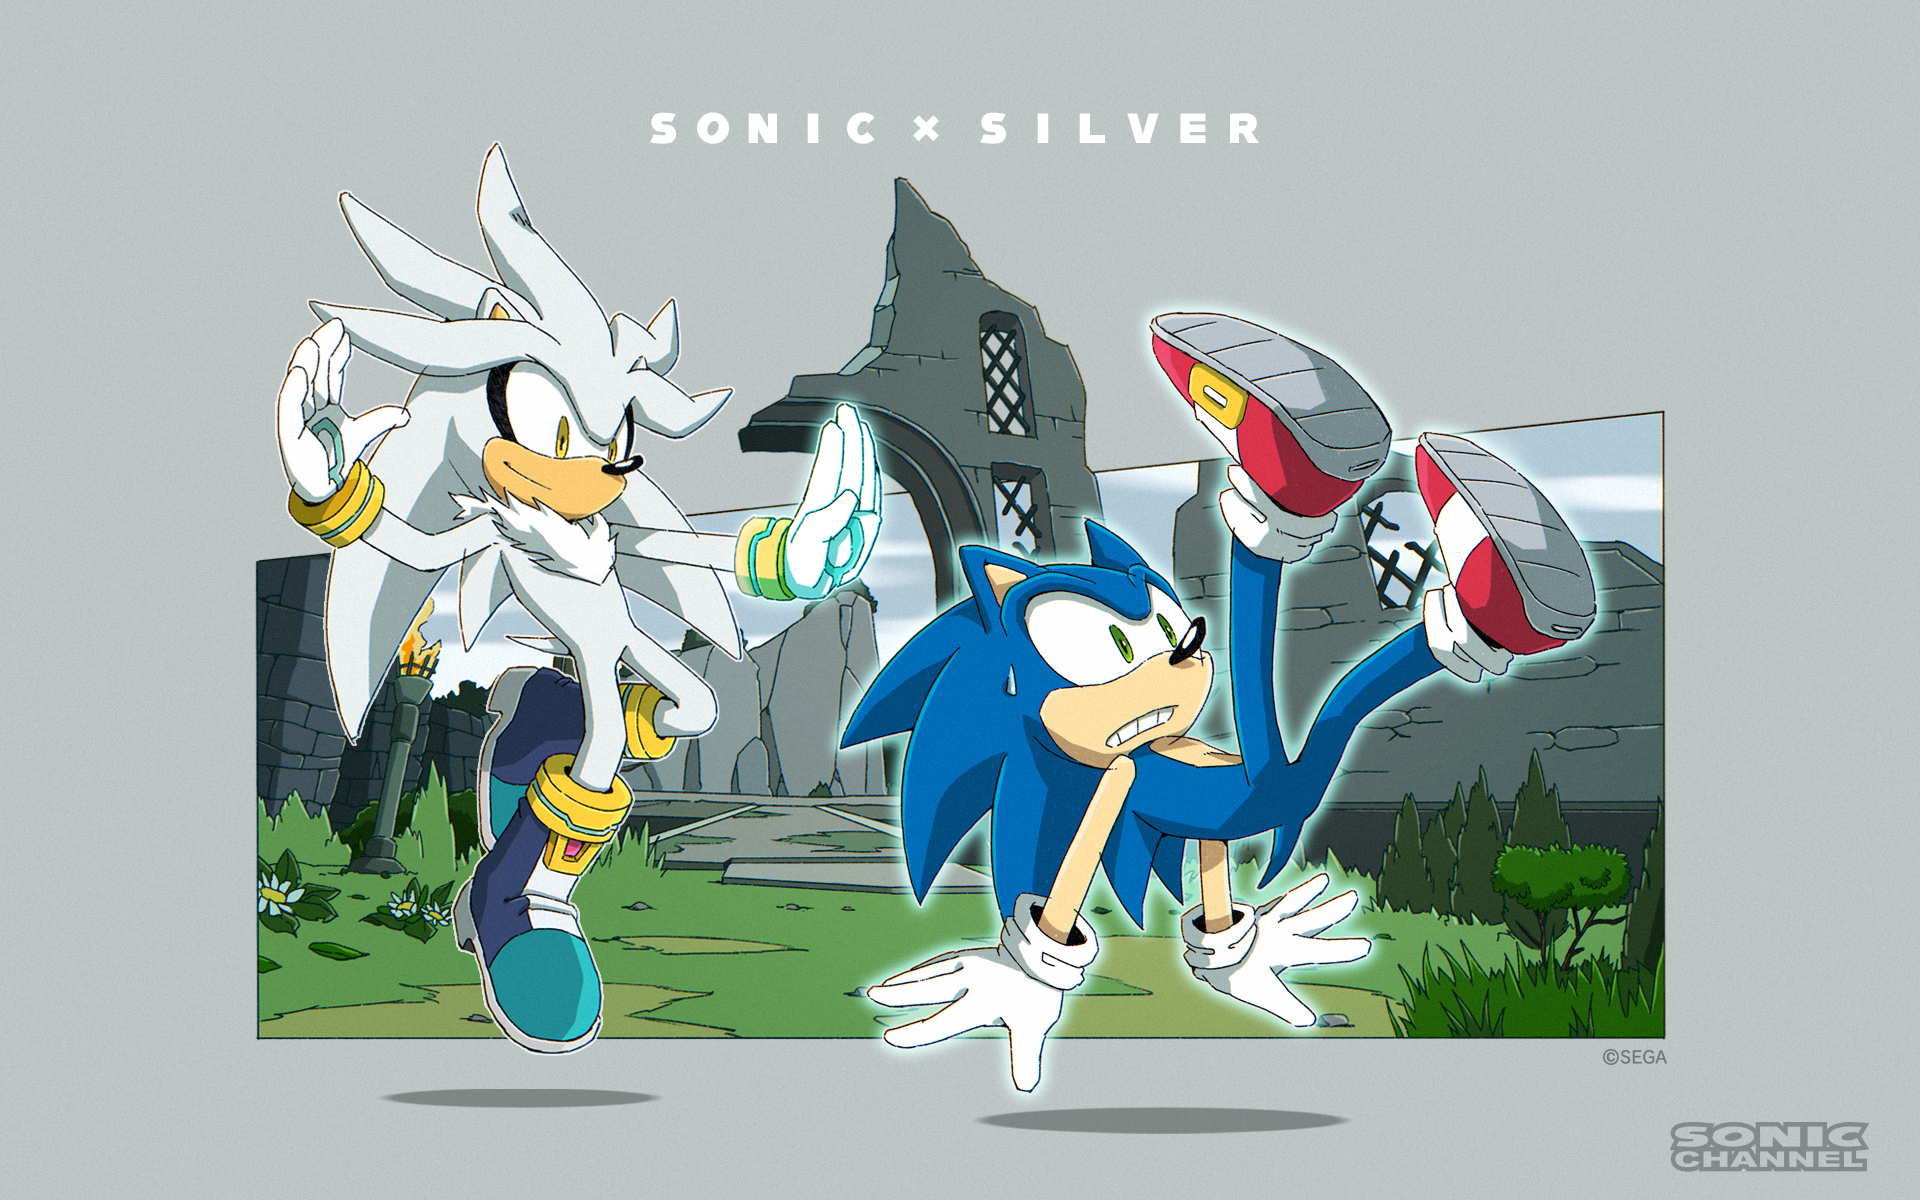 Sonic Sonic The Hedgehog Silver Sonic Silver Video Game Art PC Gaming Comic Art October 1920x1200